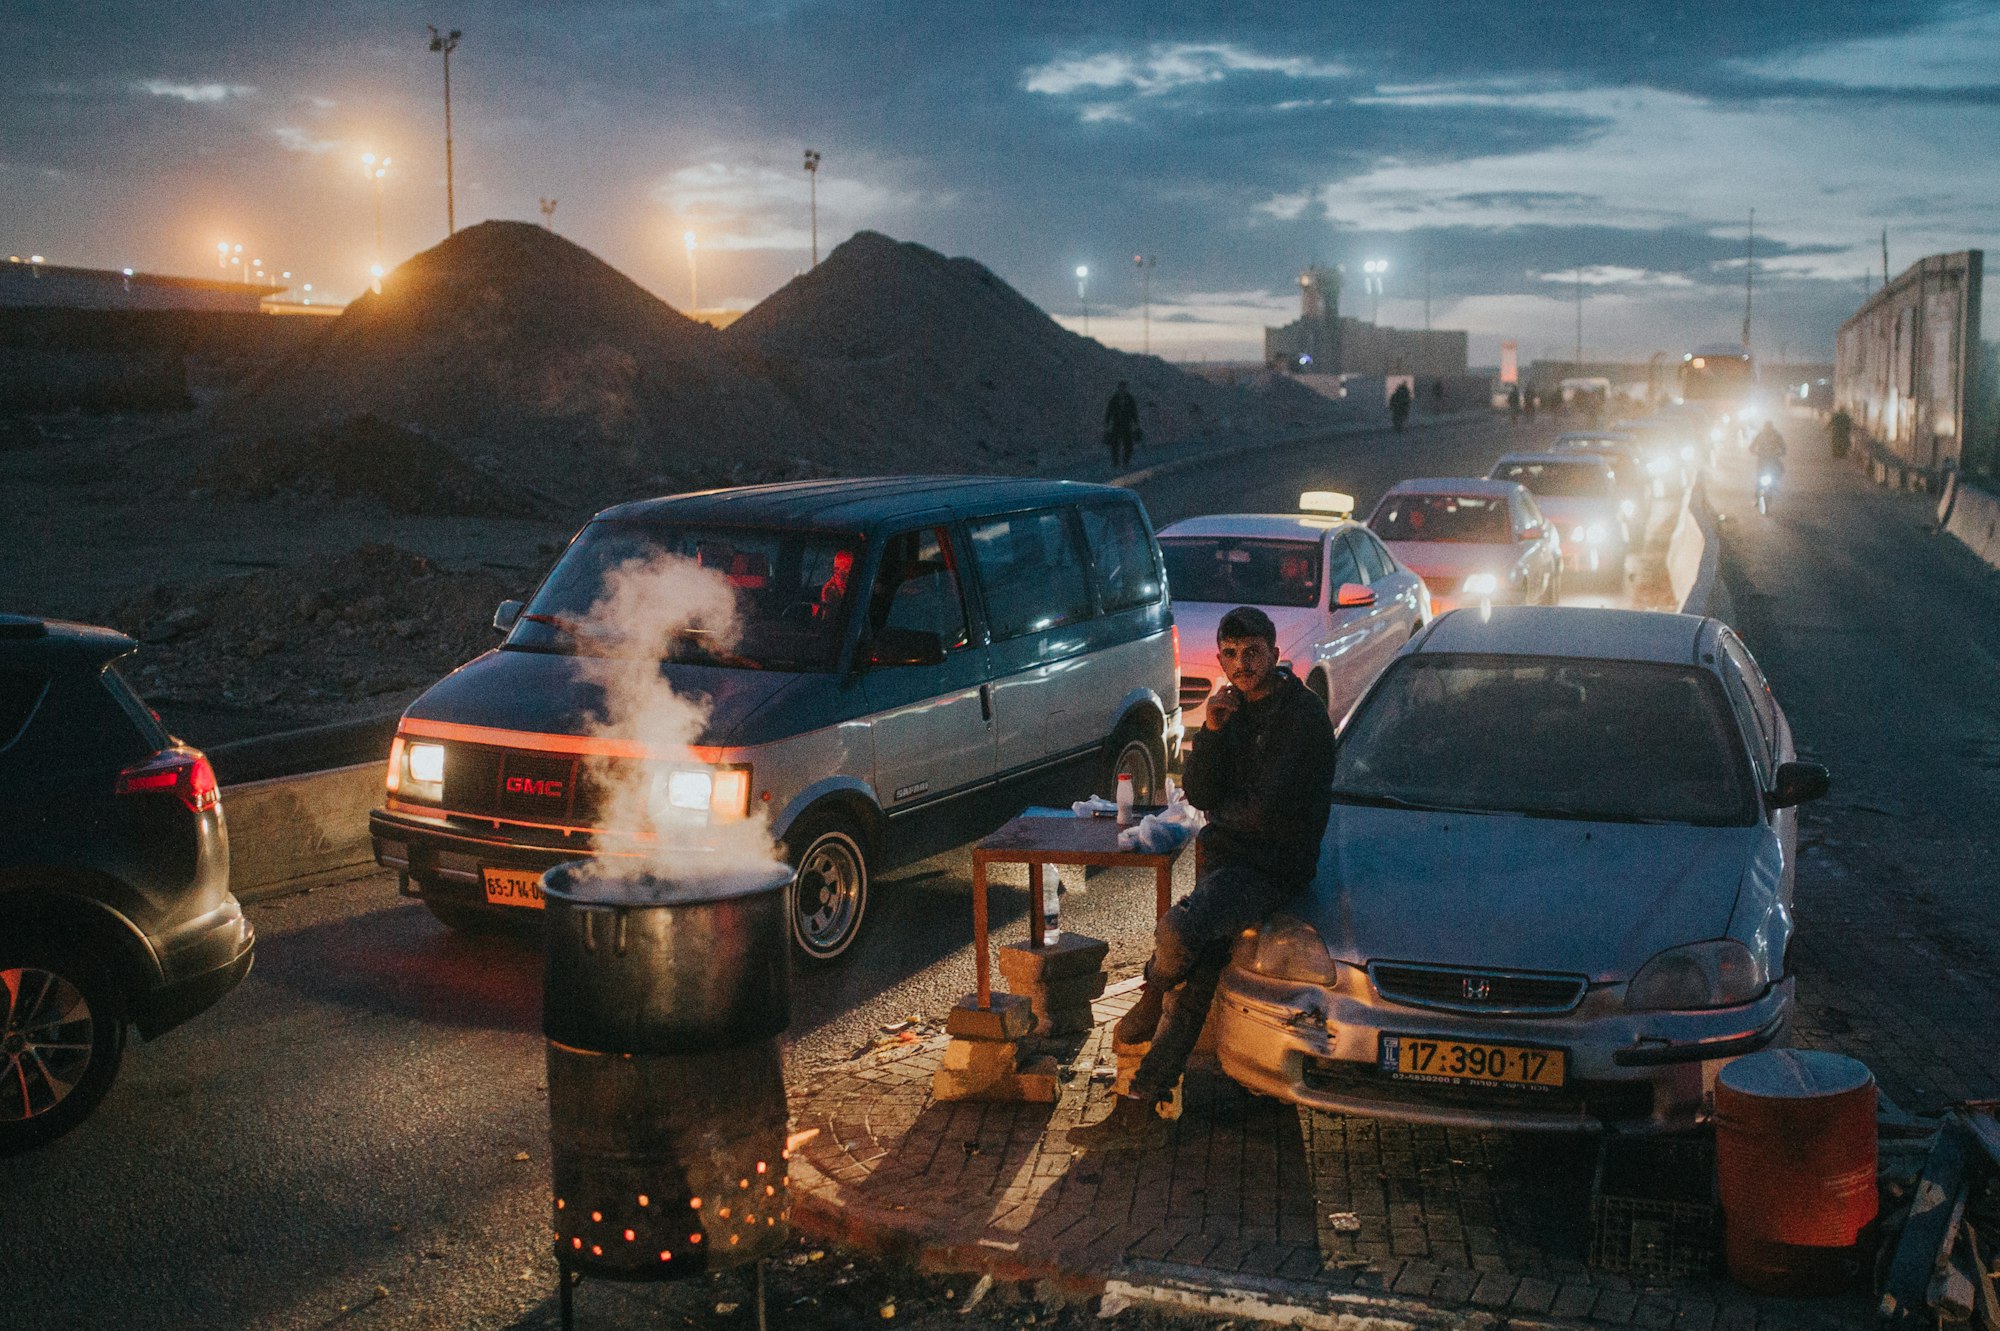 A man waiting by lines of cars going through a checkpoint from Ramallah, Palestine to enter Israel.